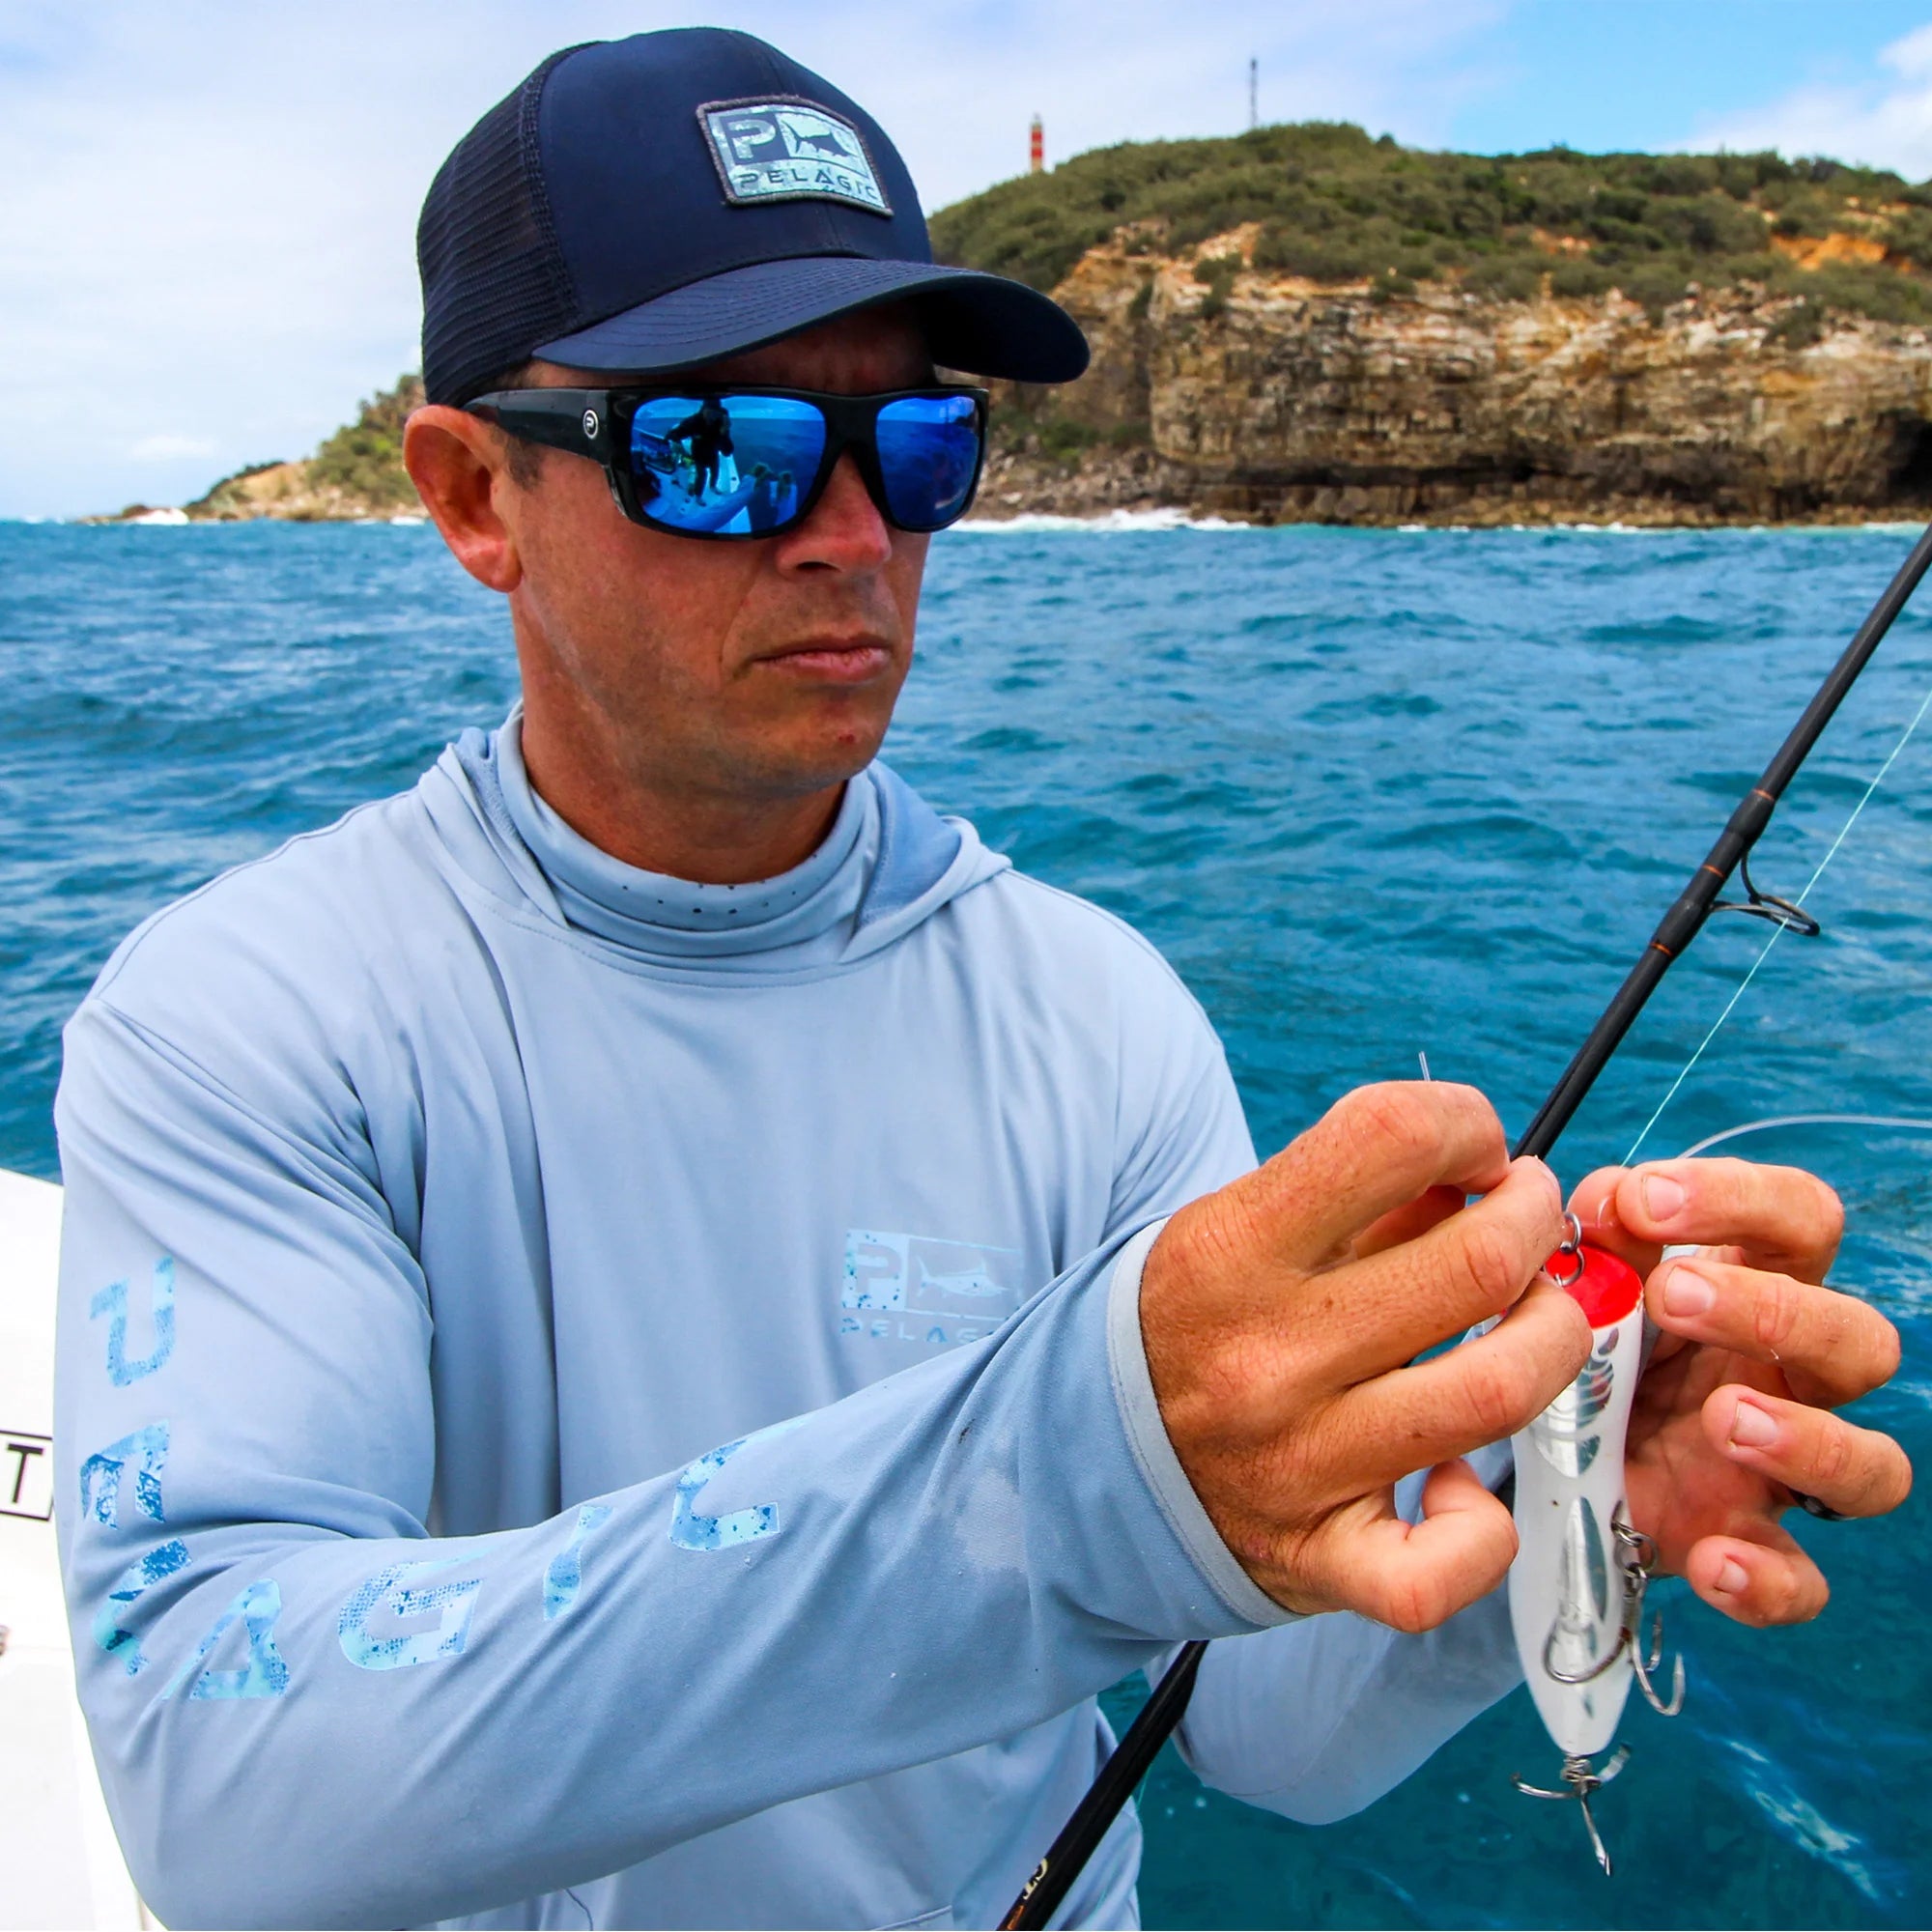 Shimano Pro Vented Seafoam, FISHING APPAREL, CLOTHING, PRODUCT